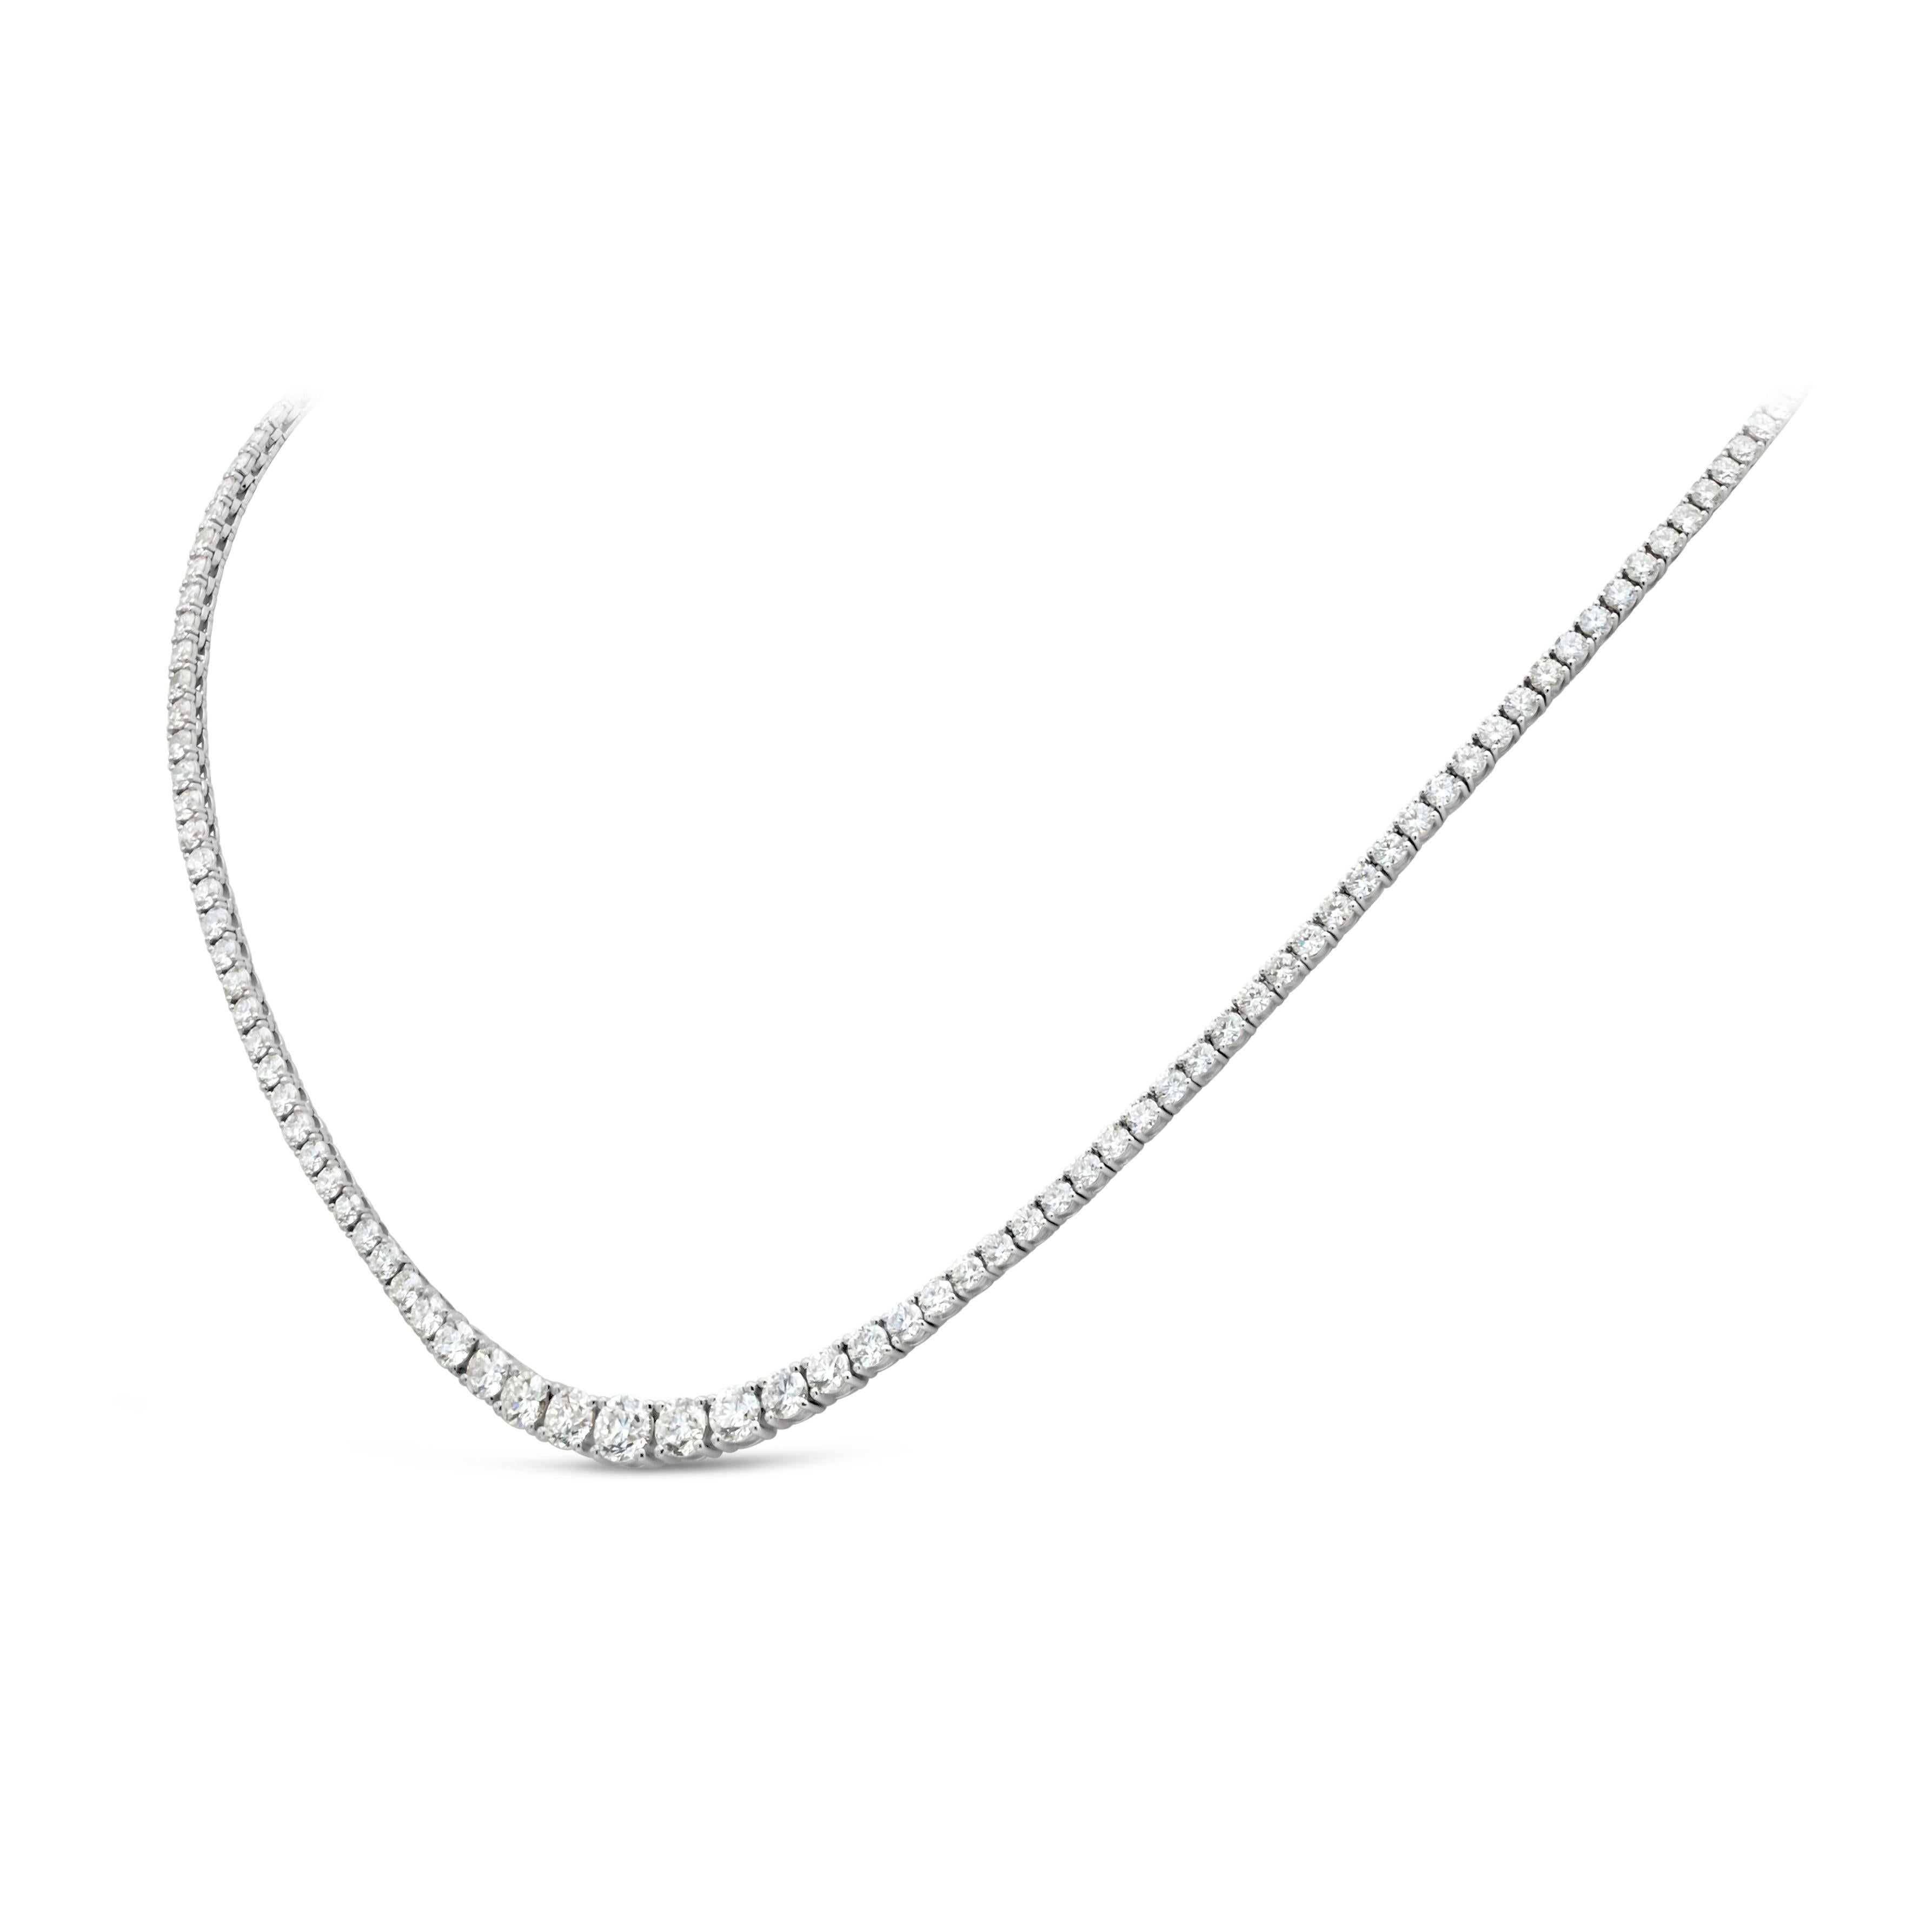 This fine dazzling slight graduation fashion tennis necklace features 9.25 carats total round brilliant diamonds, G Color and VS2-SI1 in Clarity. Set in a classic four-prong setting, finely crafted 18K White Gold. 

16 inch length, can also be